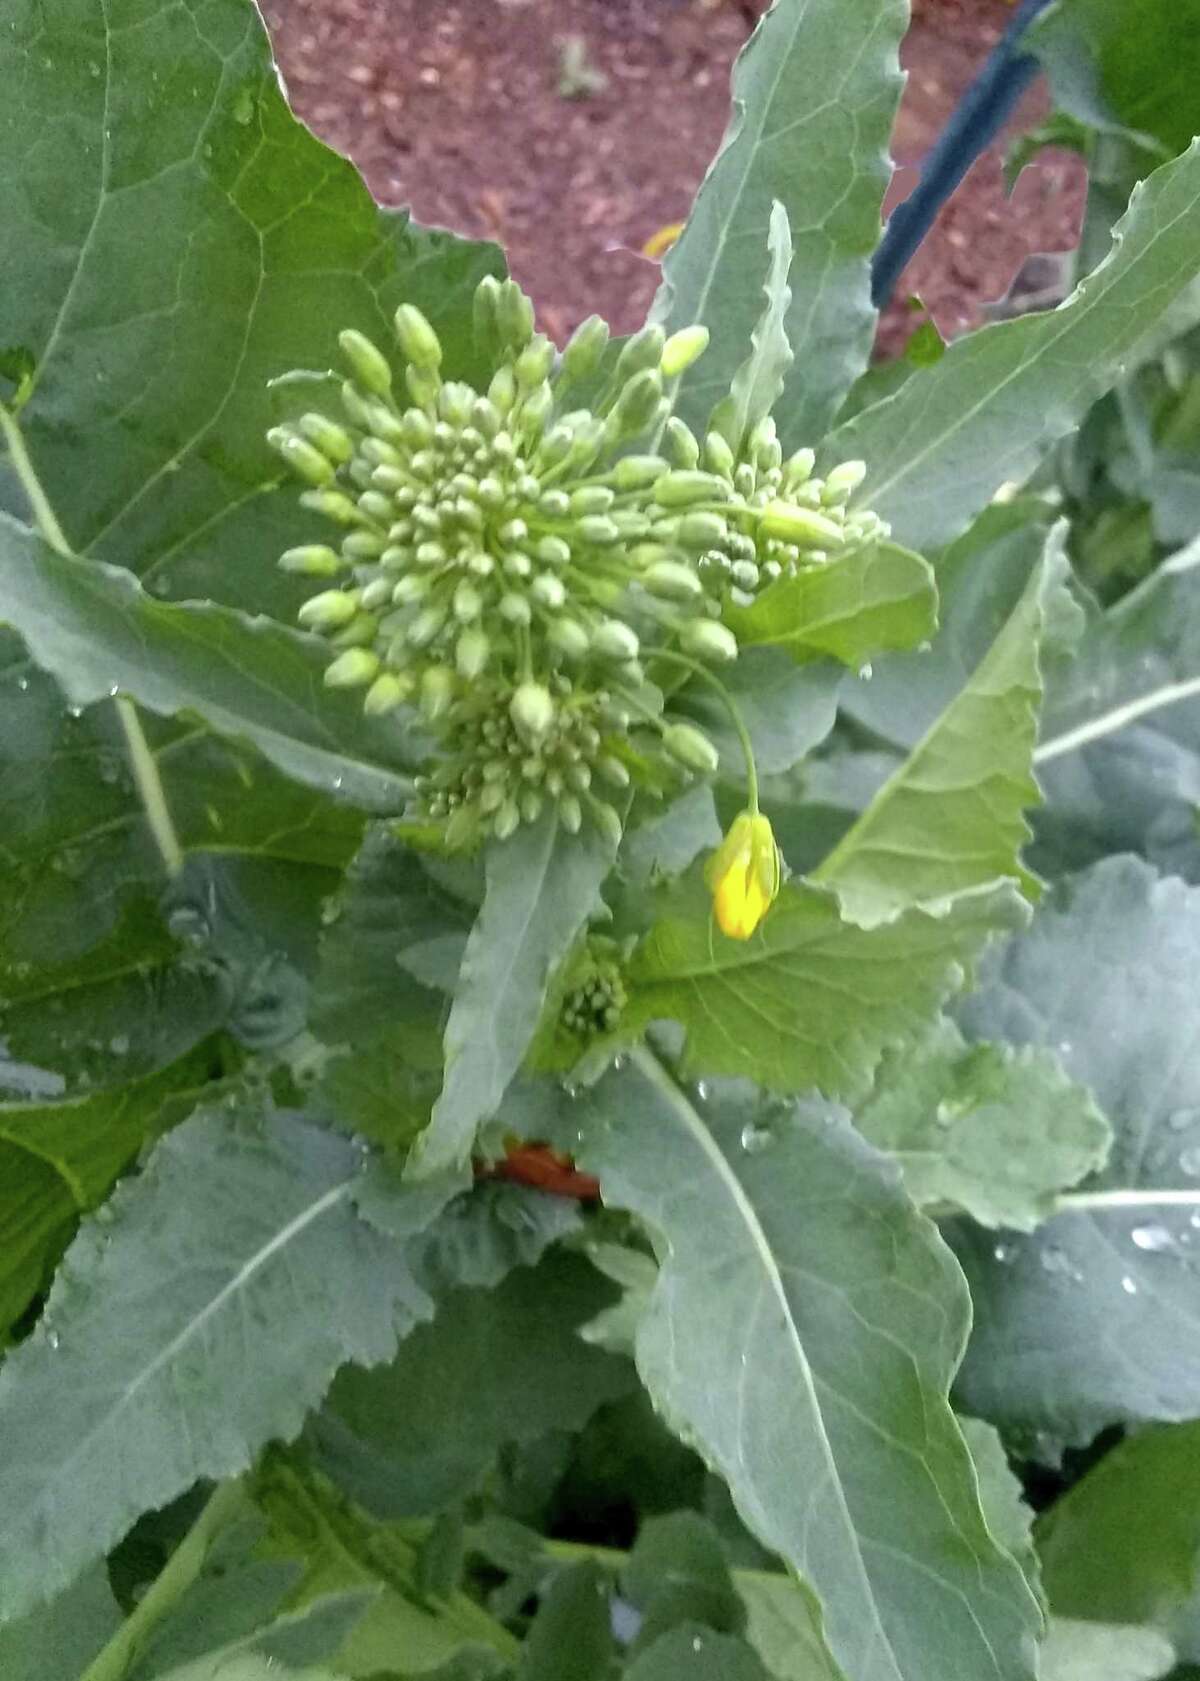 This broccoli took forever to form heads and then immediately bloomed. That may be because it was planted it too late. Planting dates for the recommended varieties of broccoli that mature quickly would be late August into mid-September in South Texas.